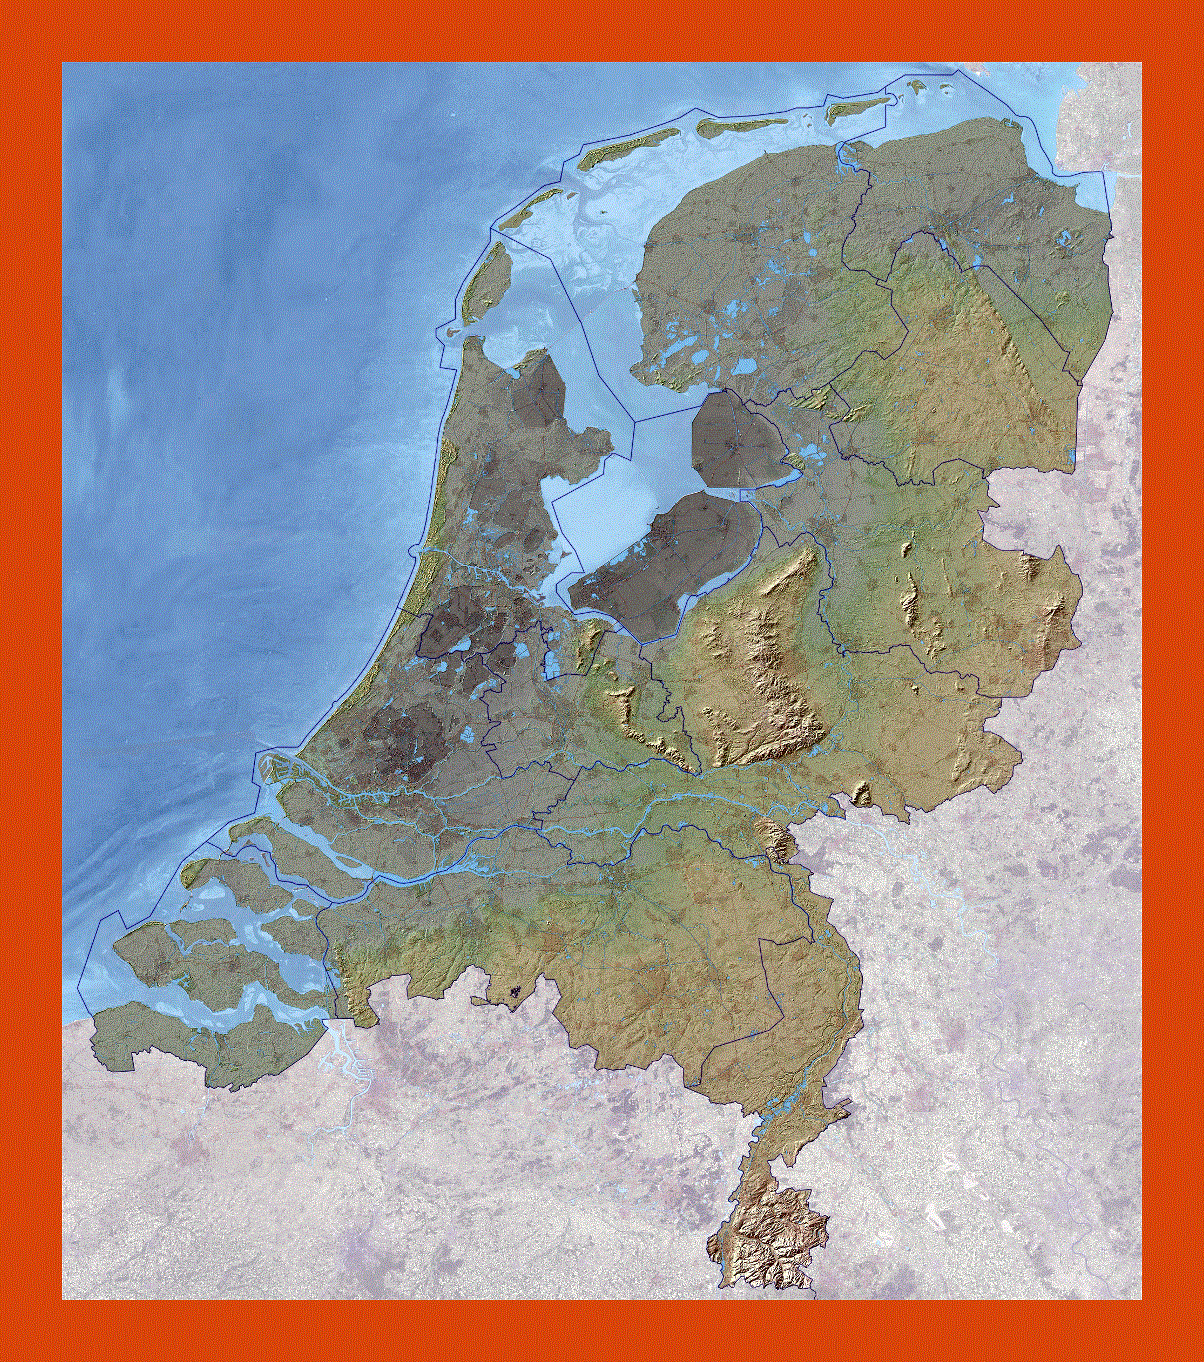 Relief map of Netherlands